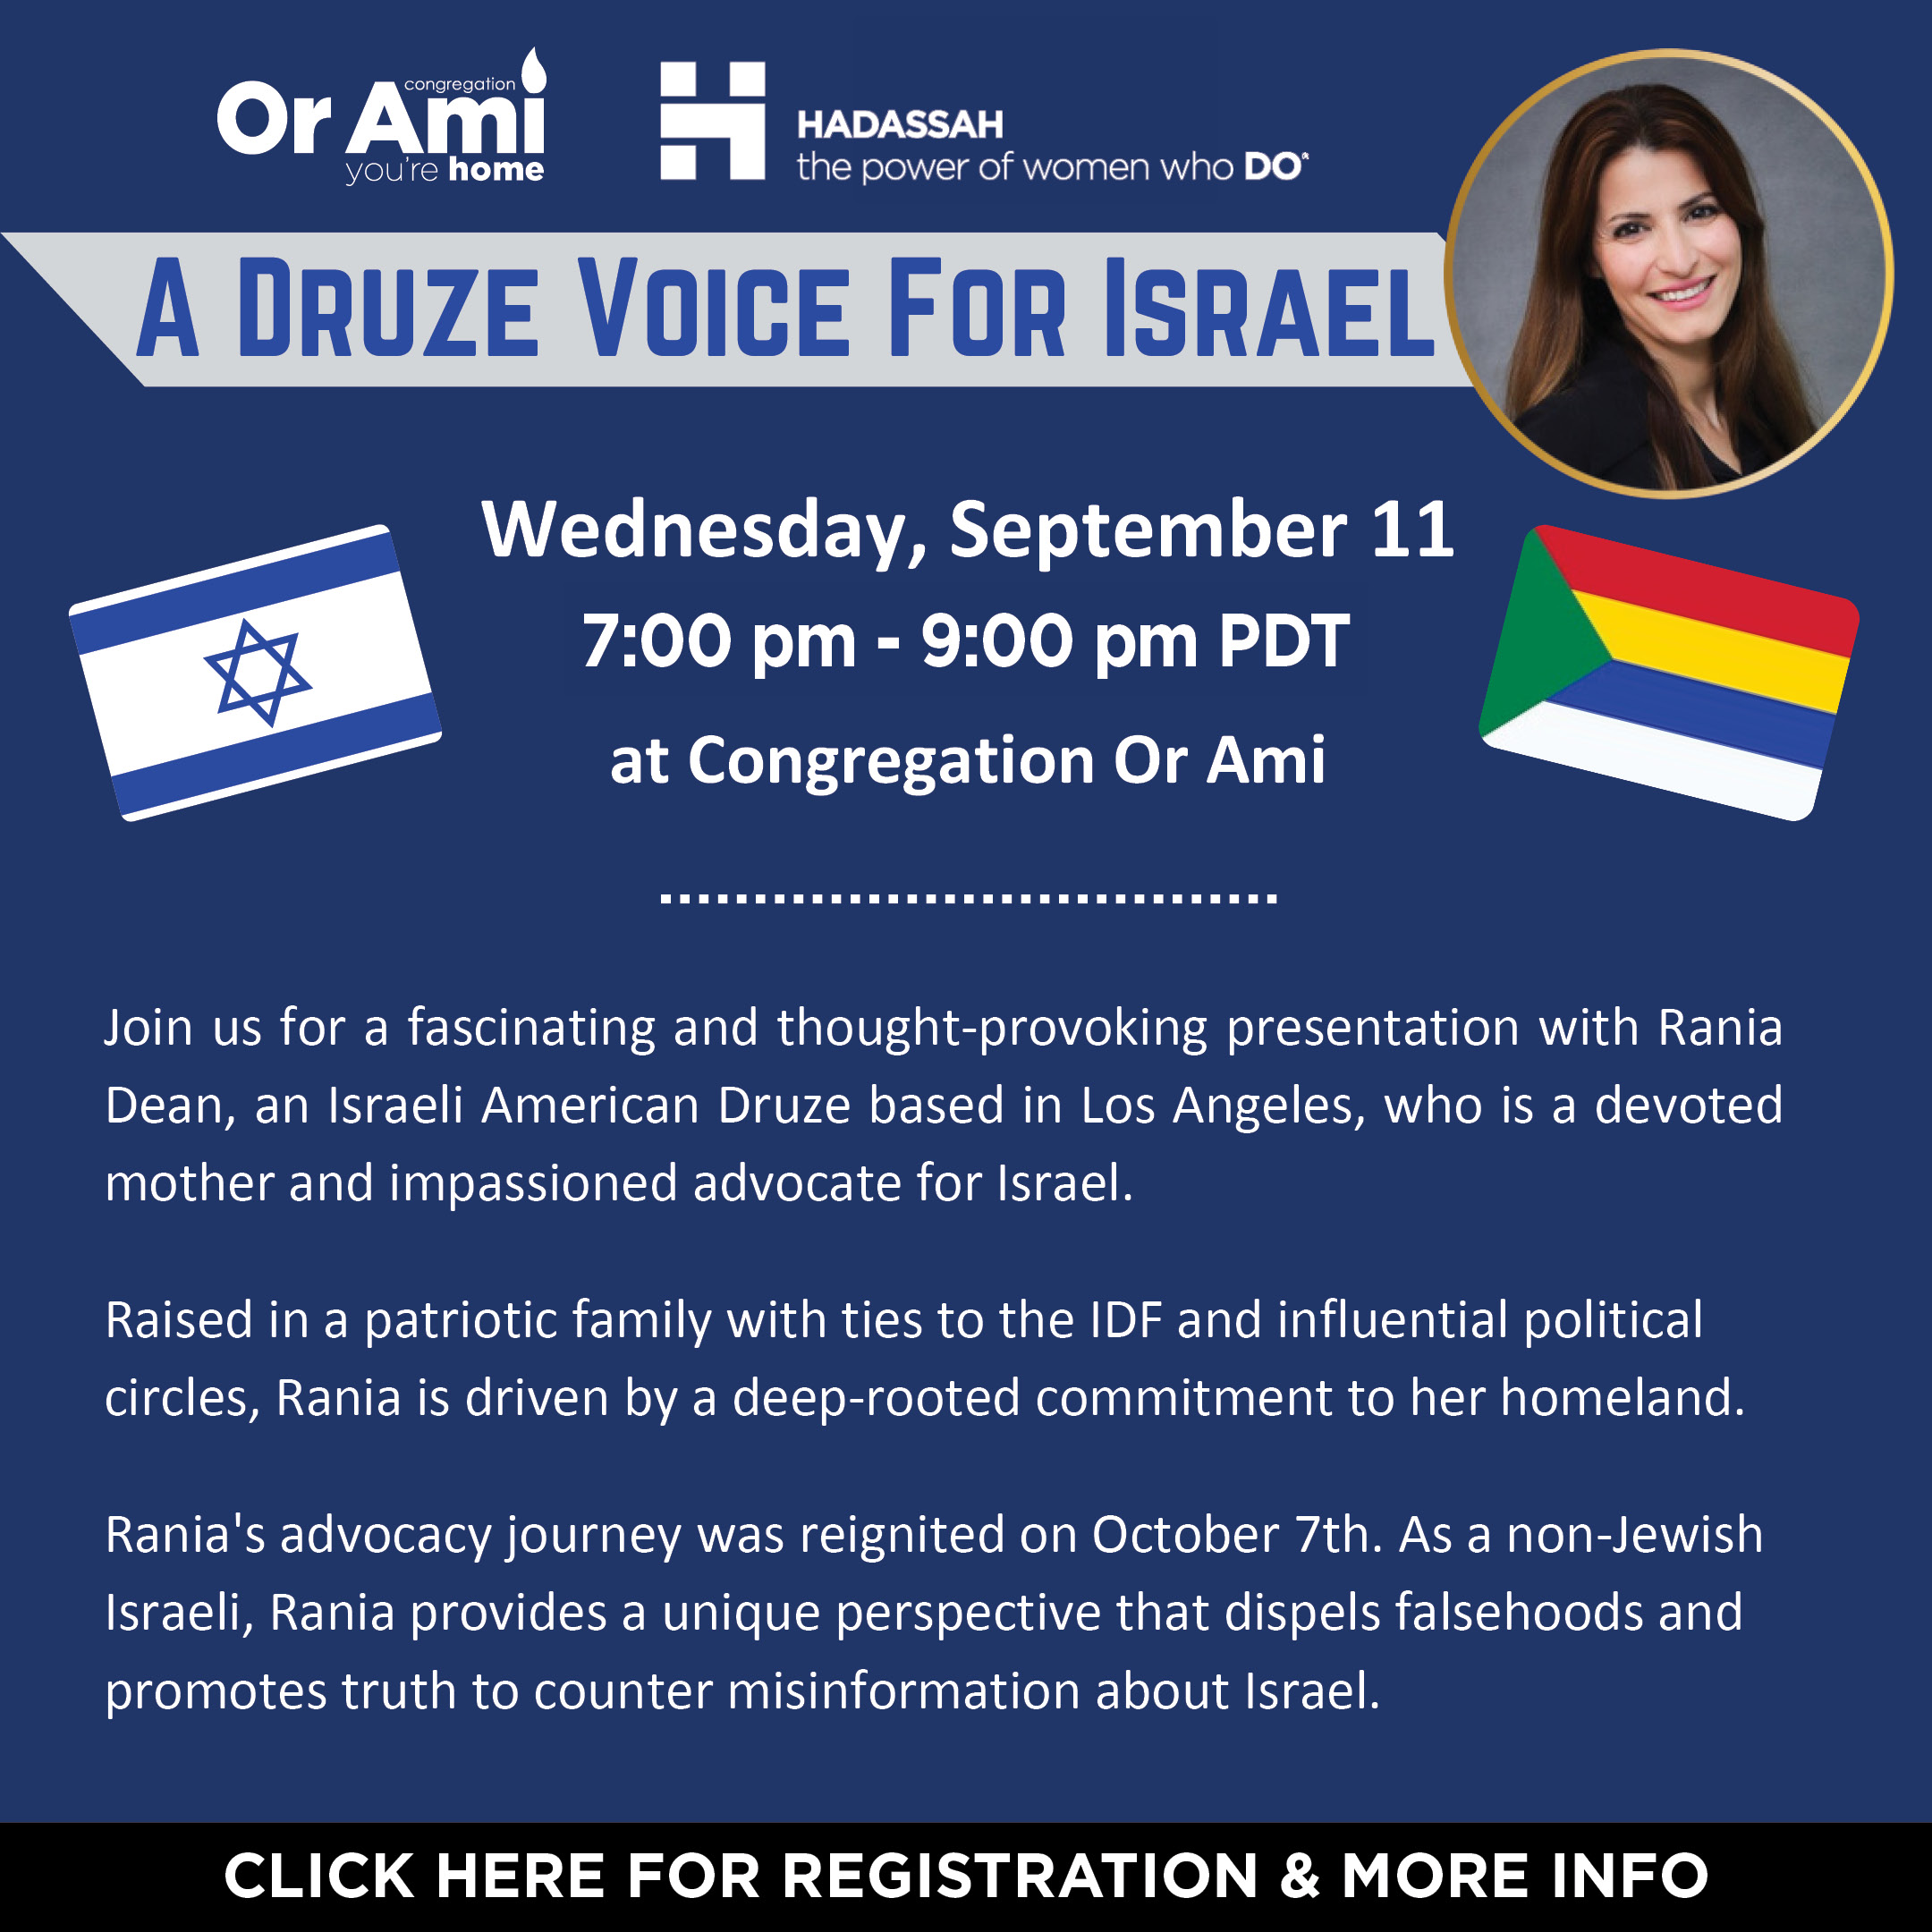 *Or Ami A Druze Voice for Israel CLICK